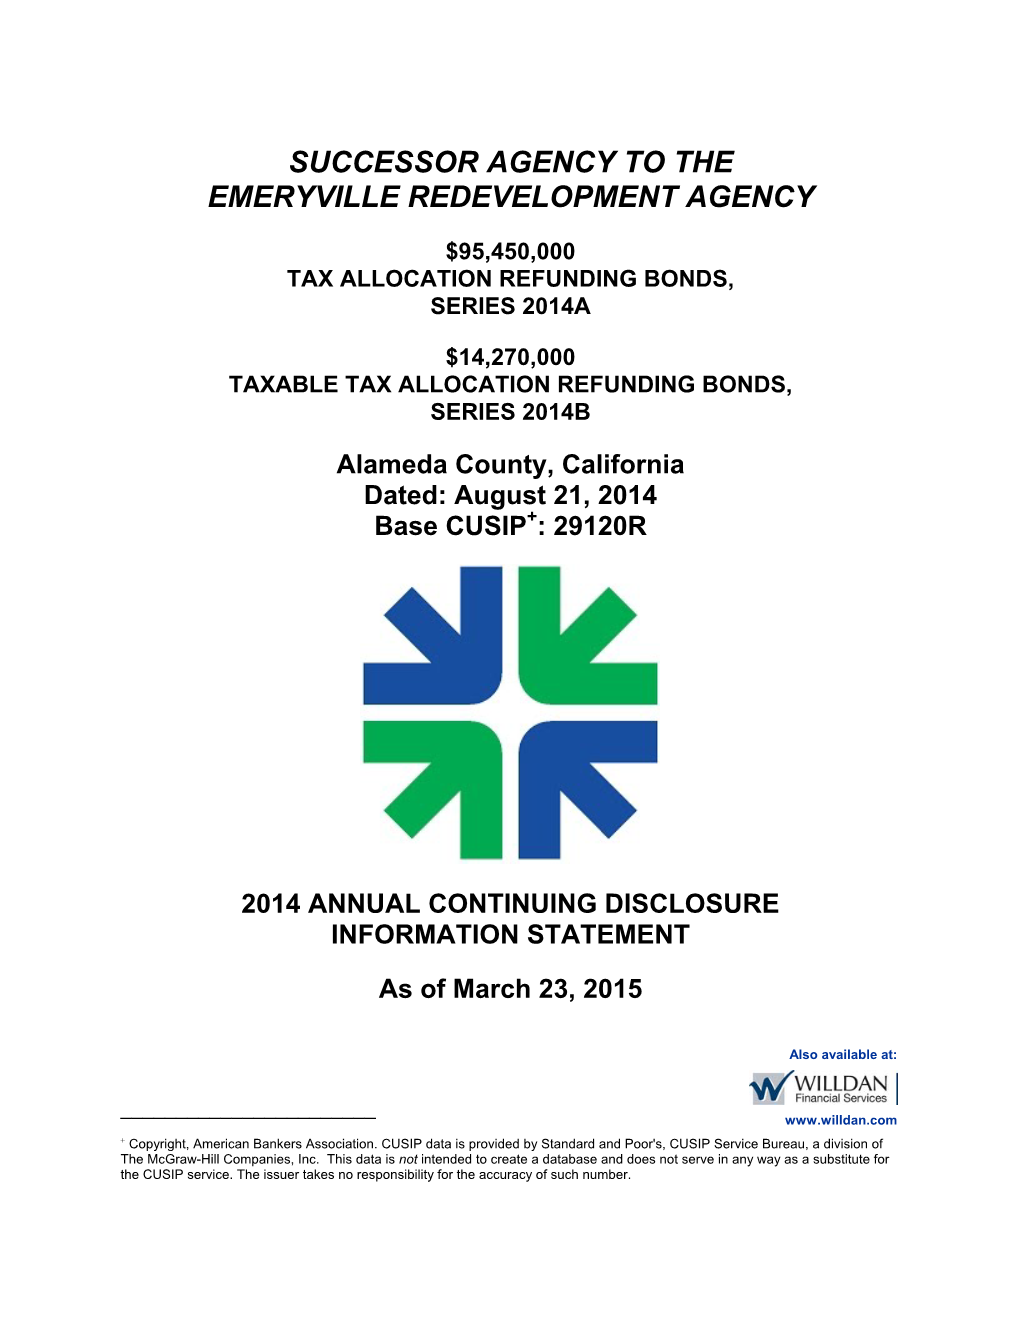 Successor Agency to the Emeryville Redevelopment Agency